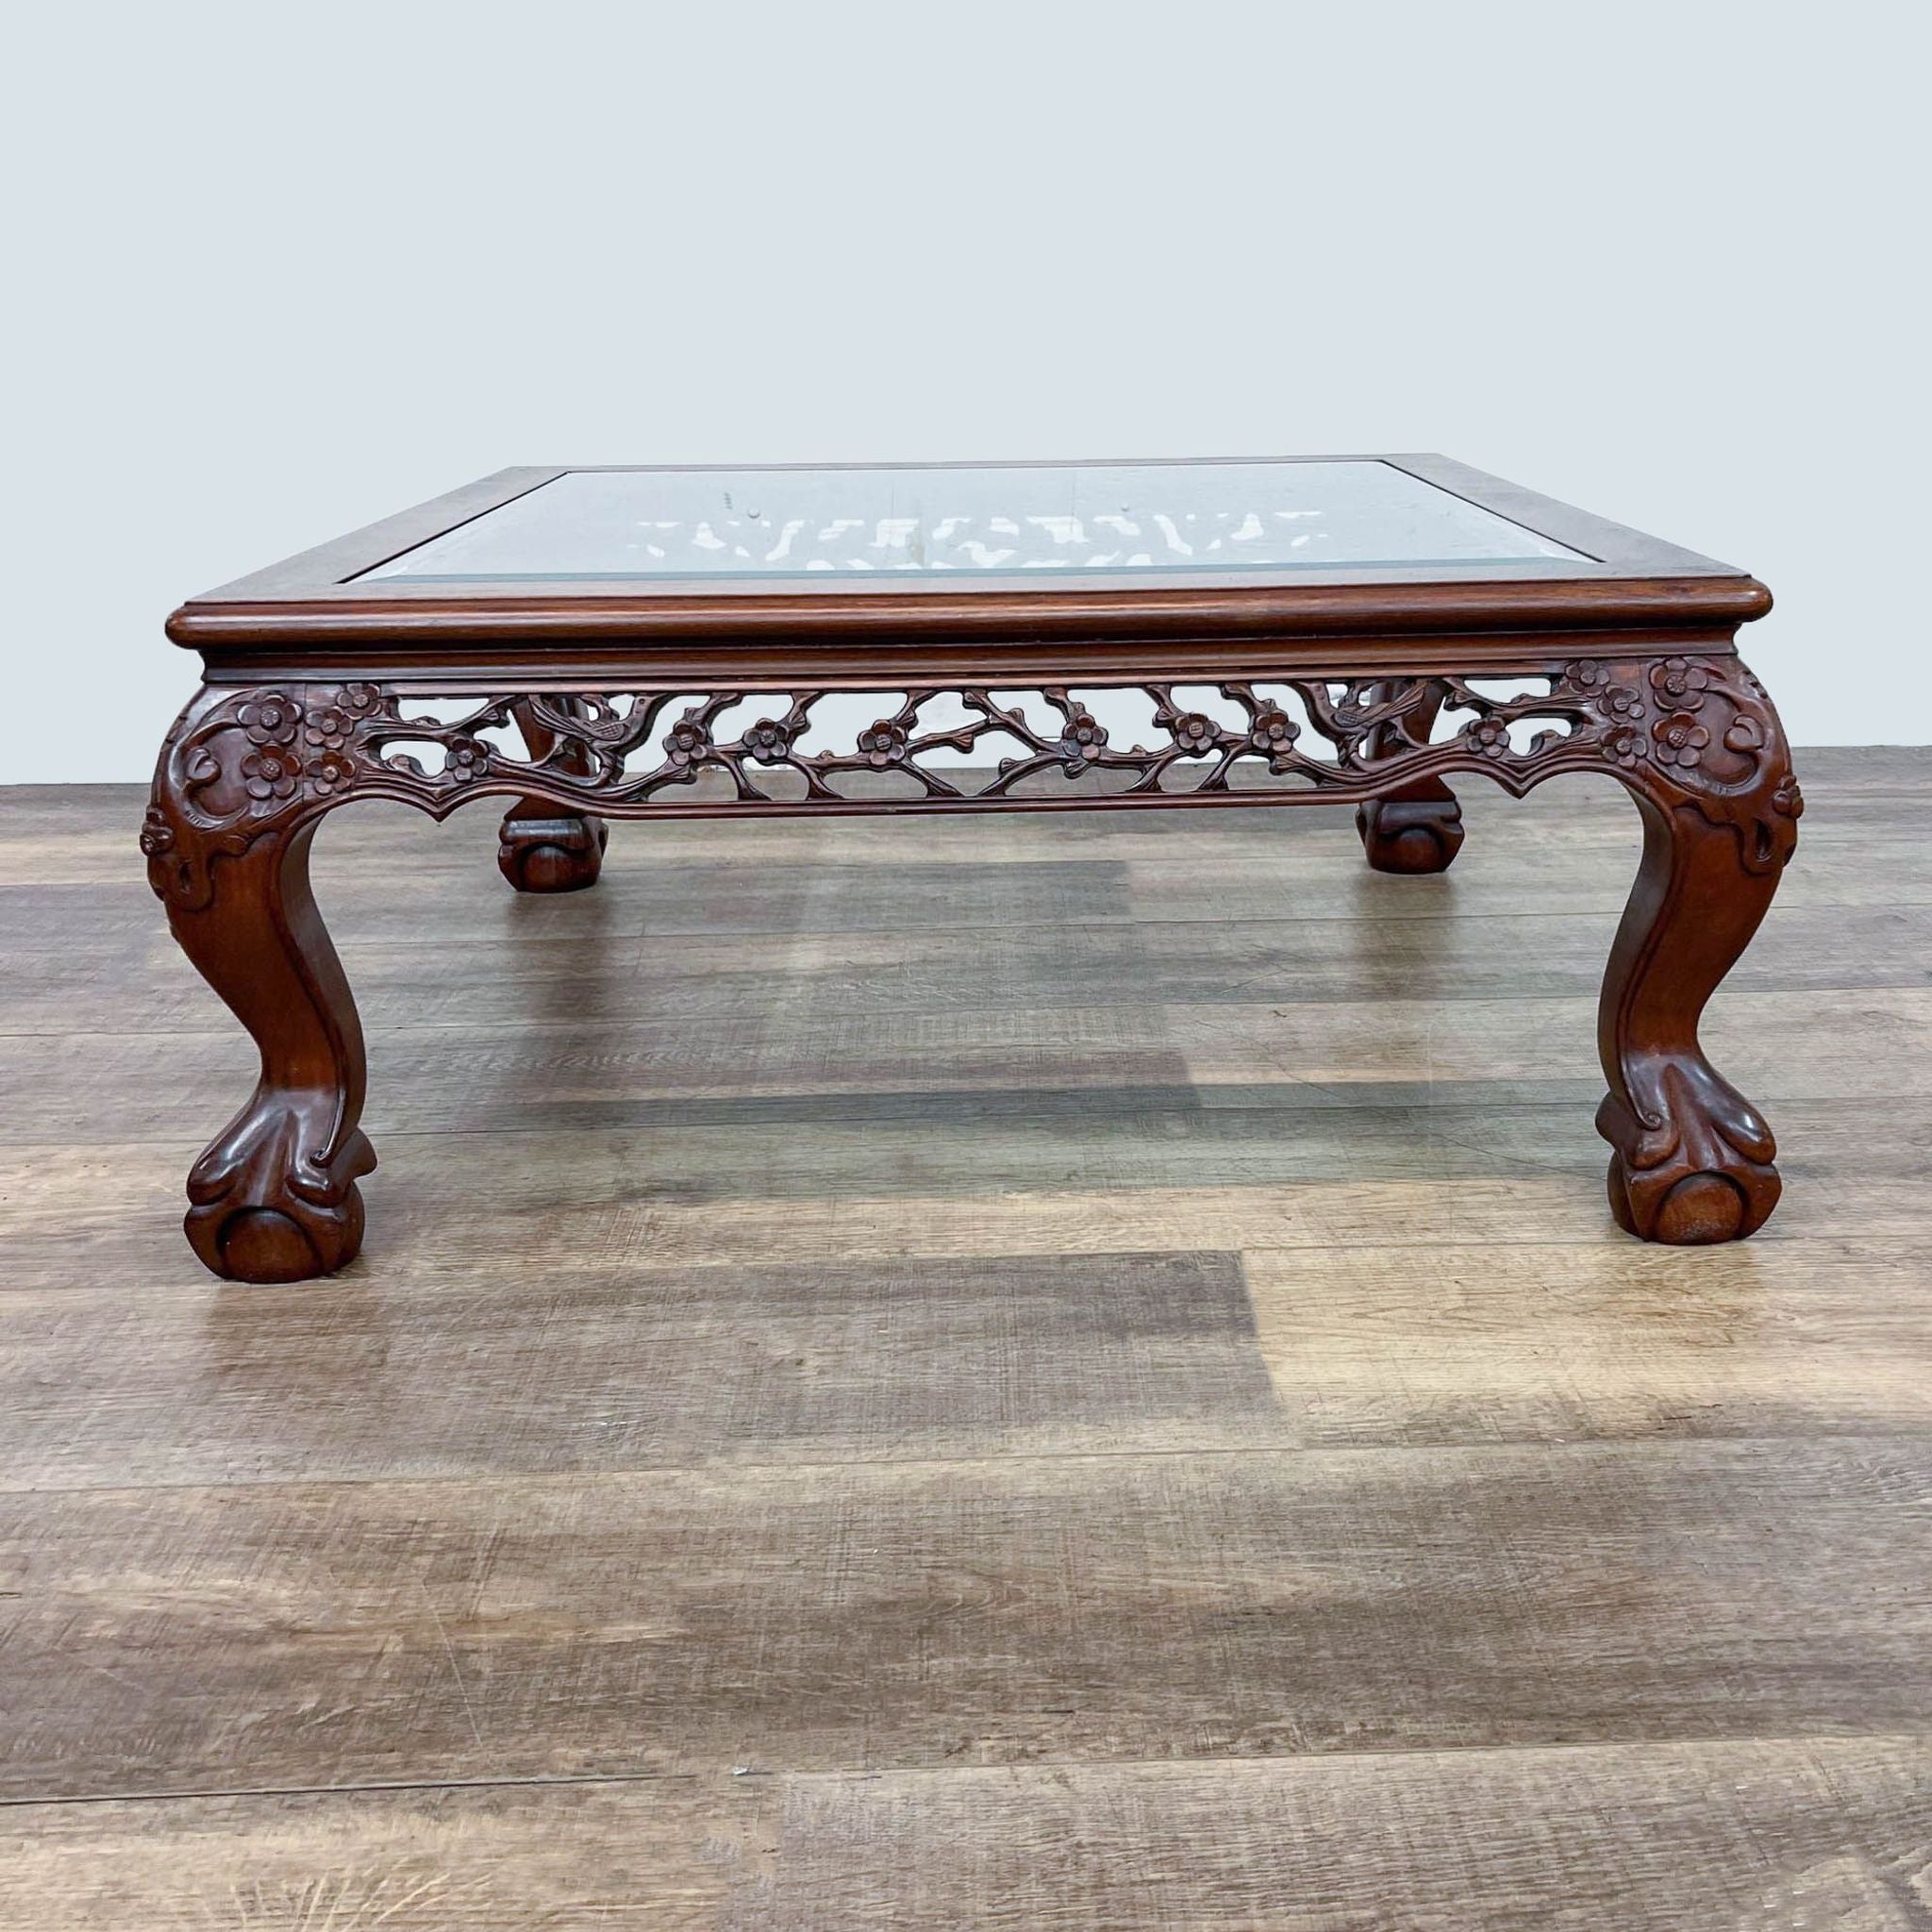 Reperch brand Chinese Chippendale style coffee table with ornate carvings and ball and claw feet.